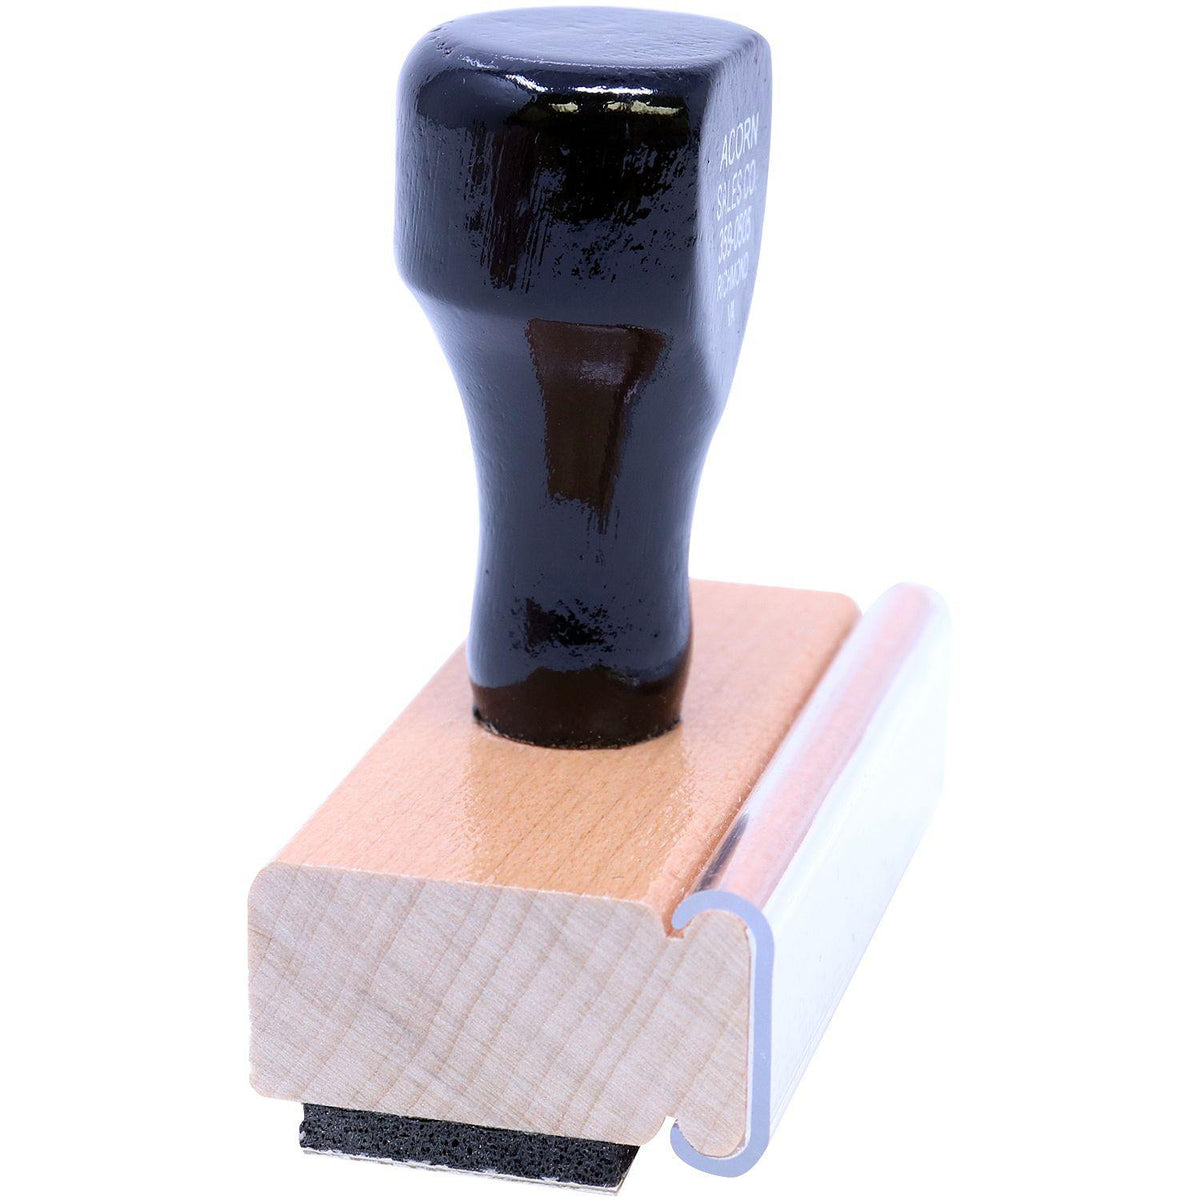 Side View of Large Post Dated Rubber Stamp at an Angle